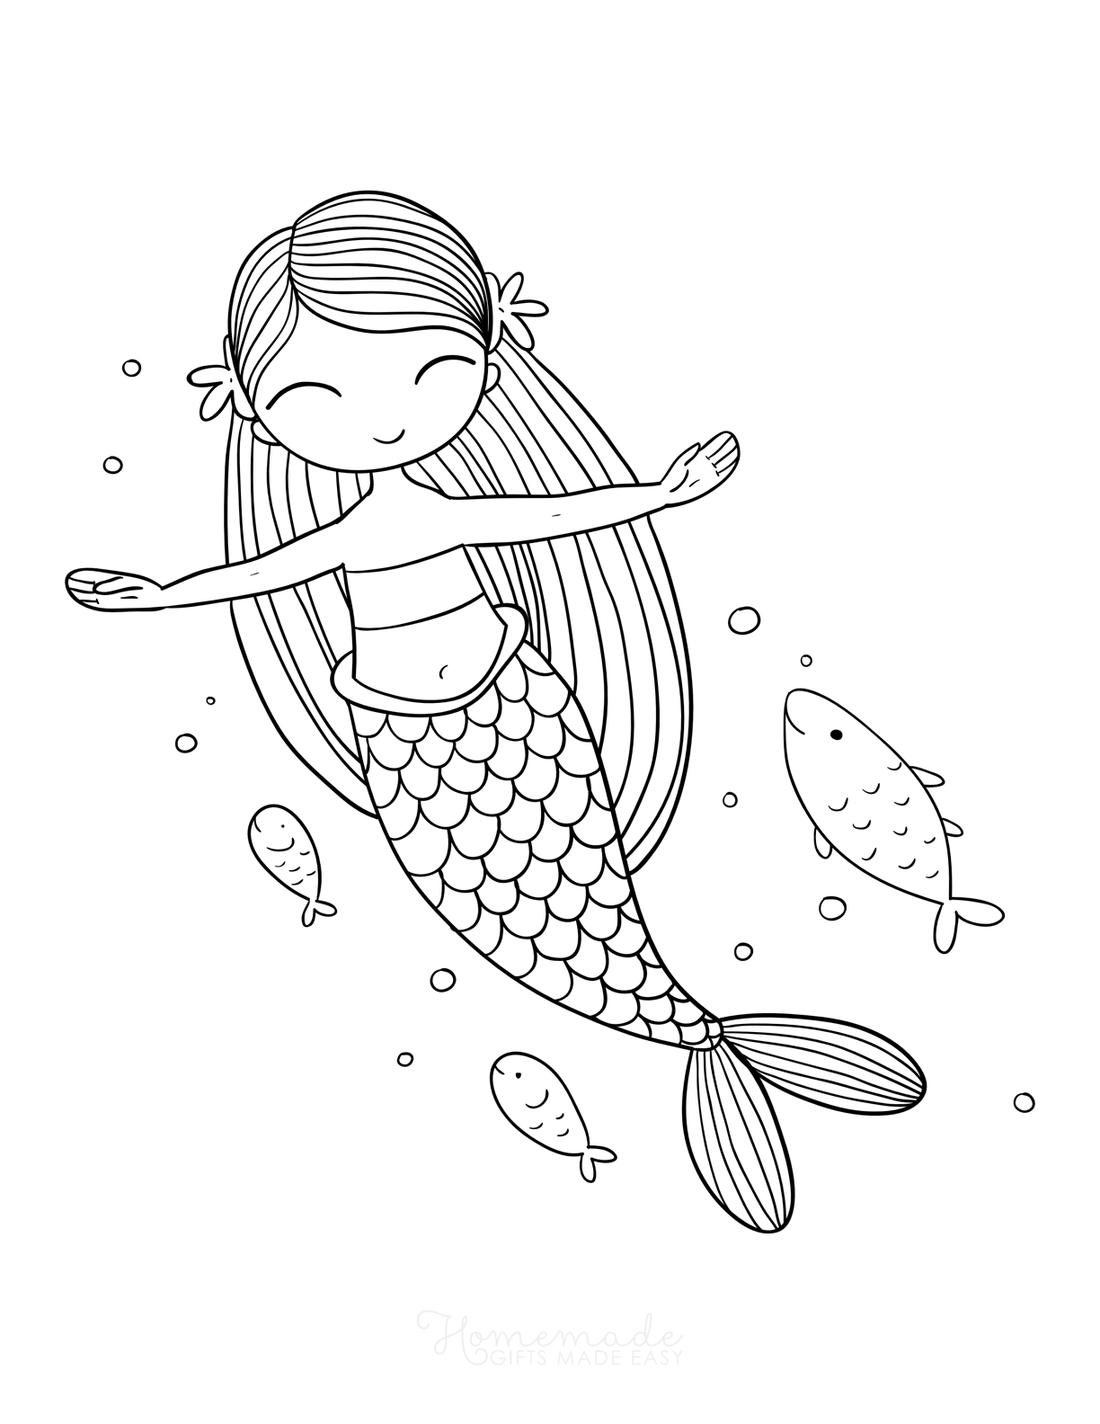 Go under the sea with these 10 kid-friendly mermaid coloring pages